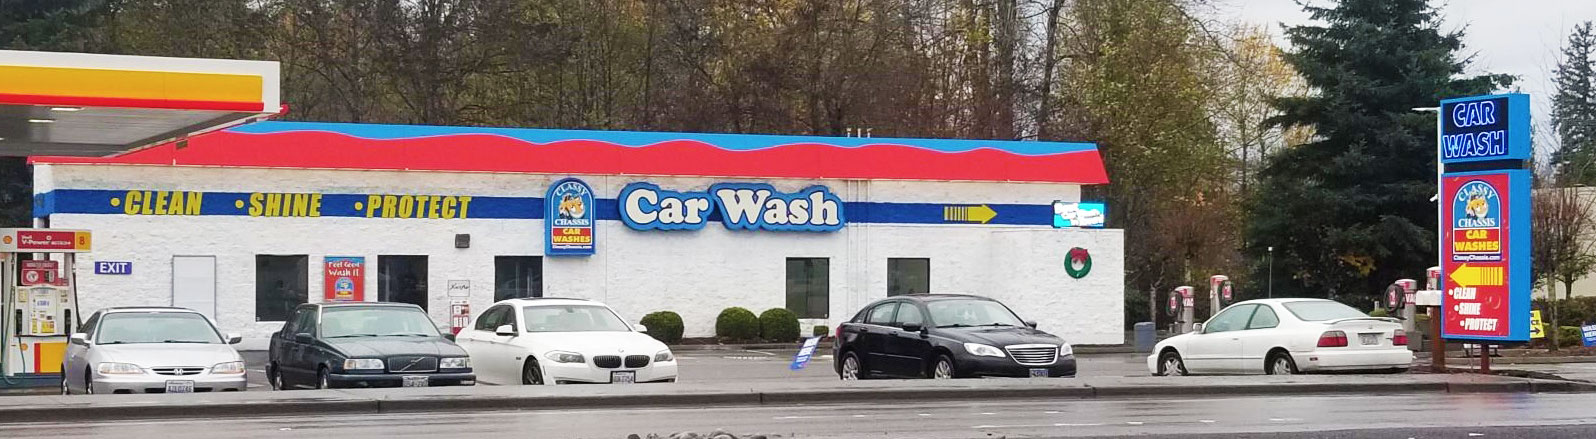 Classy Chassis Car Wash